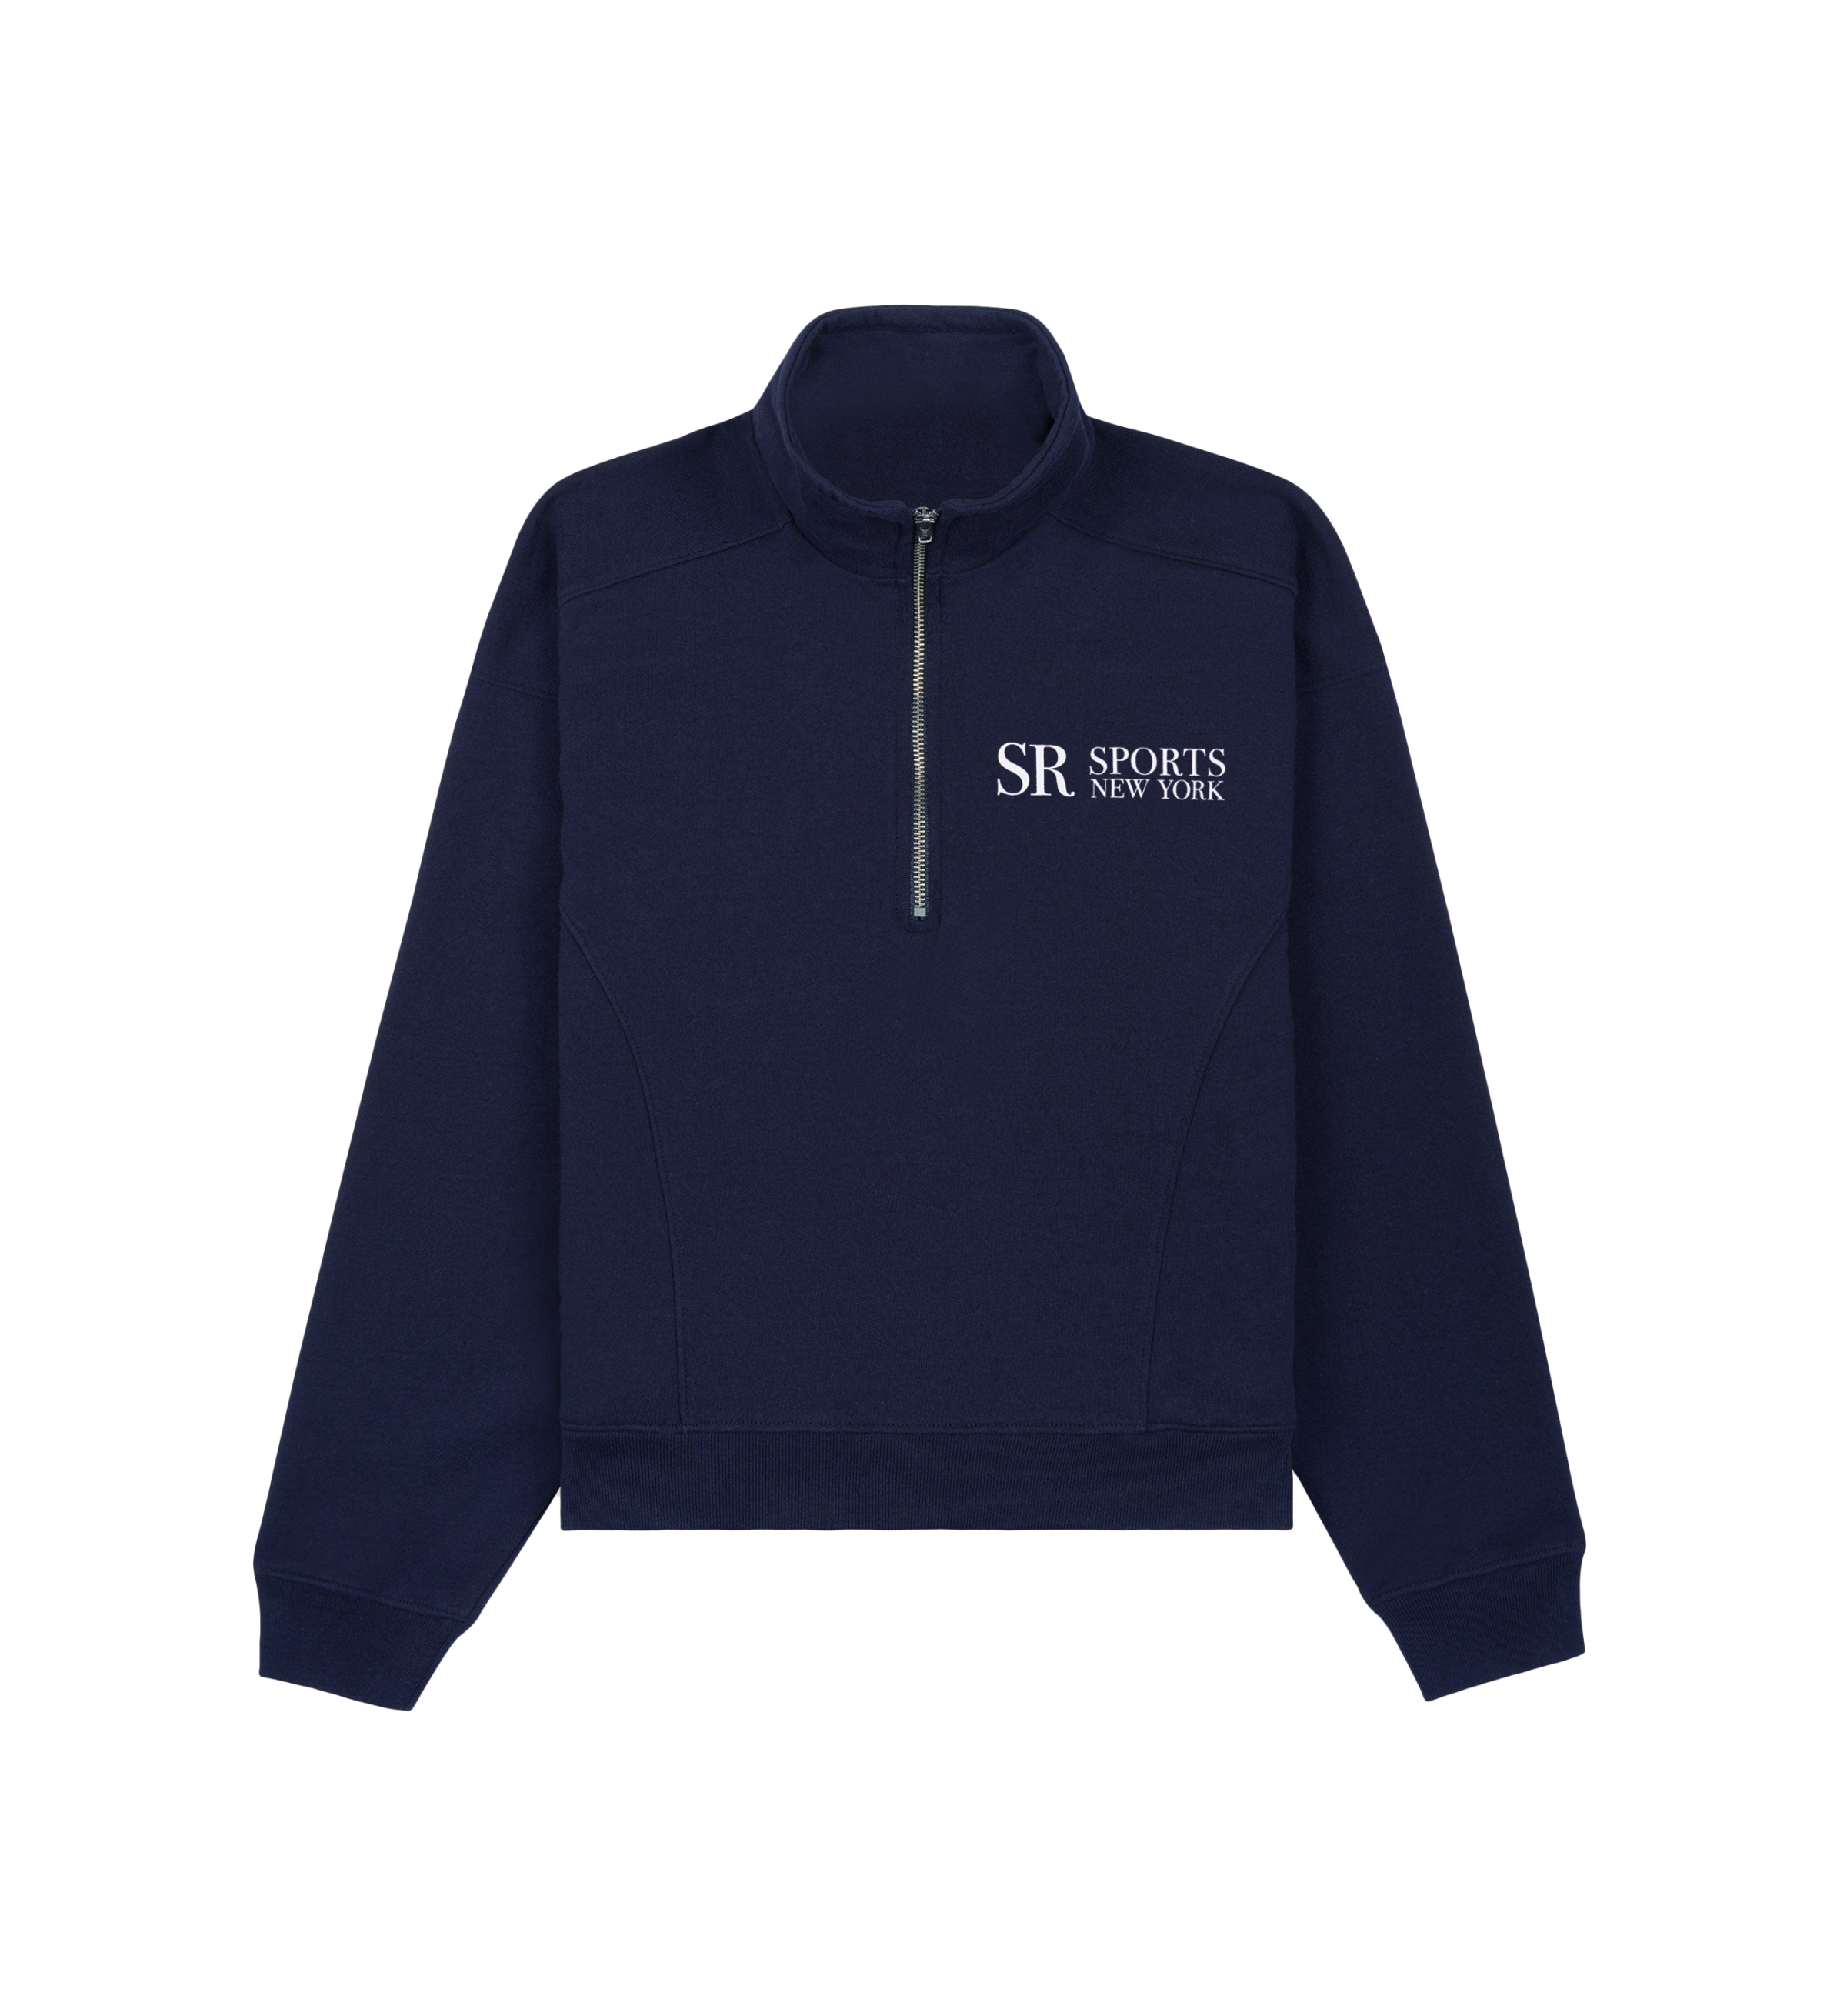 Sporty And Rich Sr Sports Zip Up Sweatshirt In Navy Blue